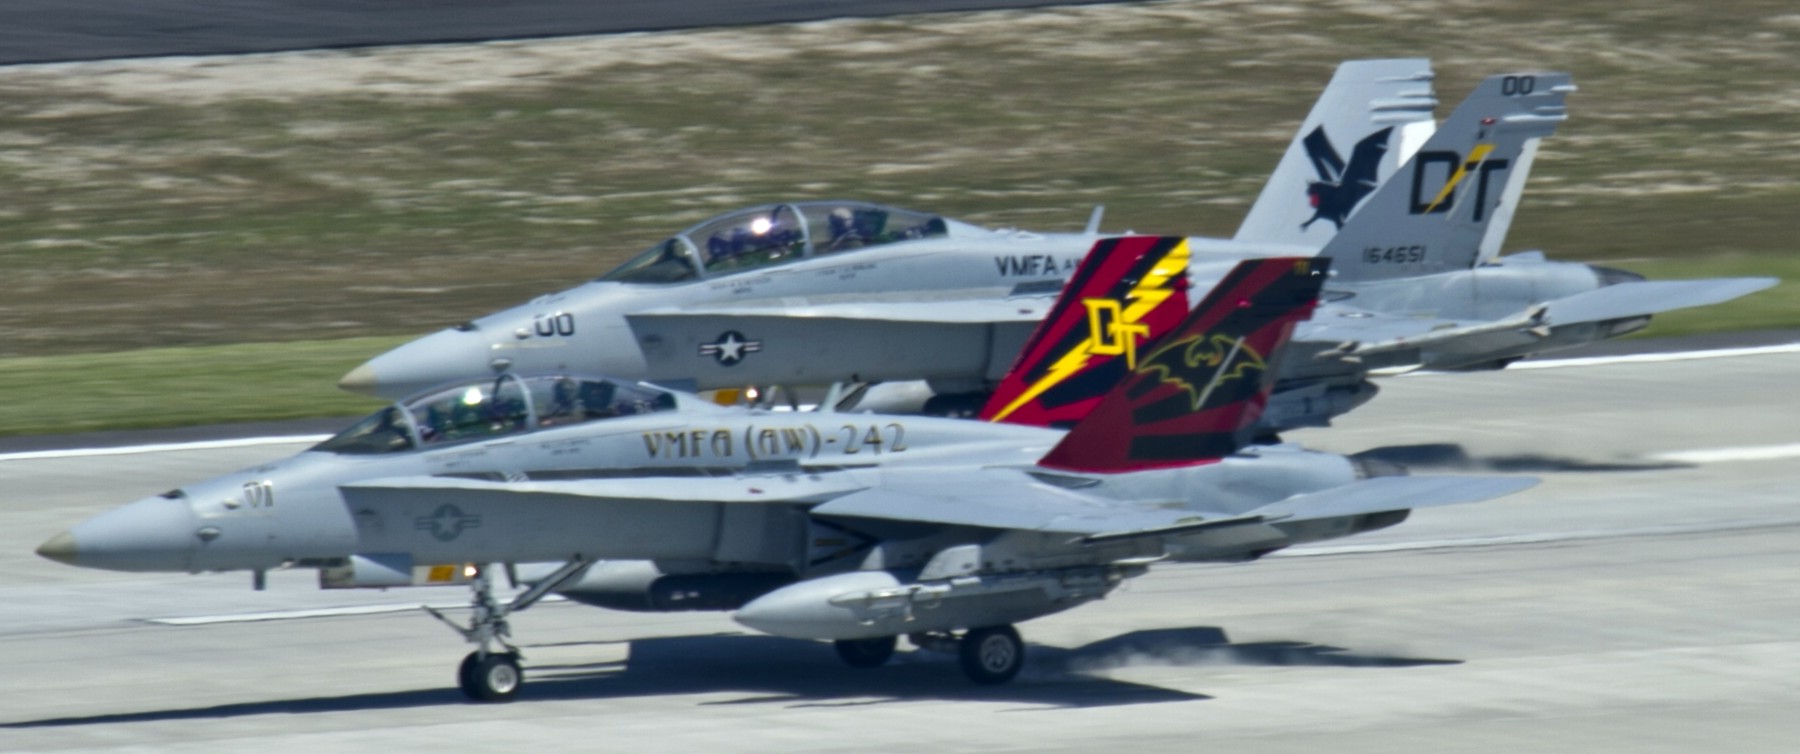 vmfa(aw)-242 bats marine all-weather fighter attack squadron usmc f/a-18d hornet 122